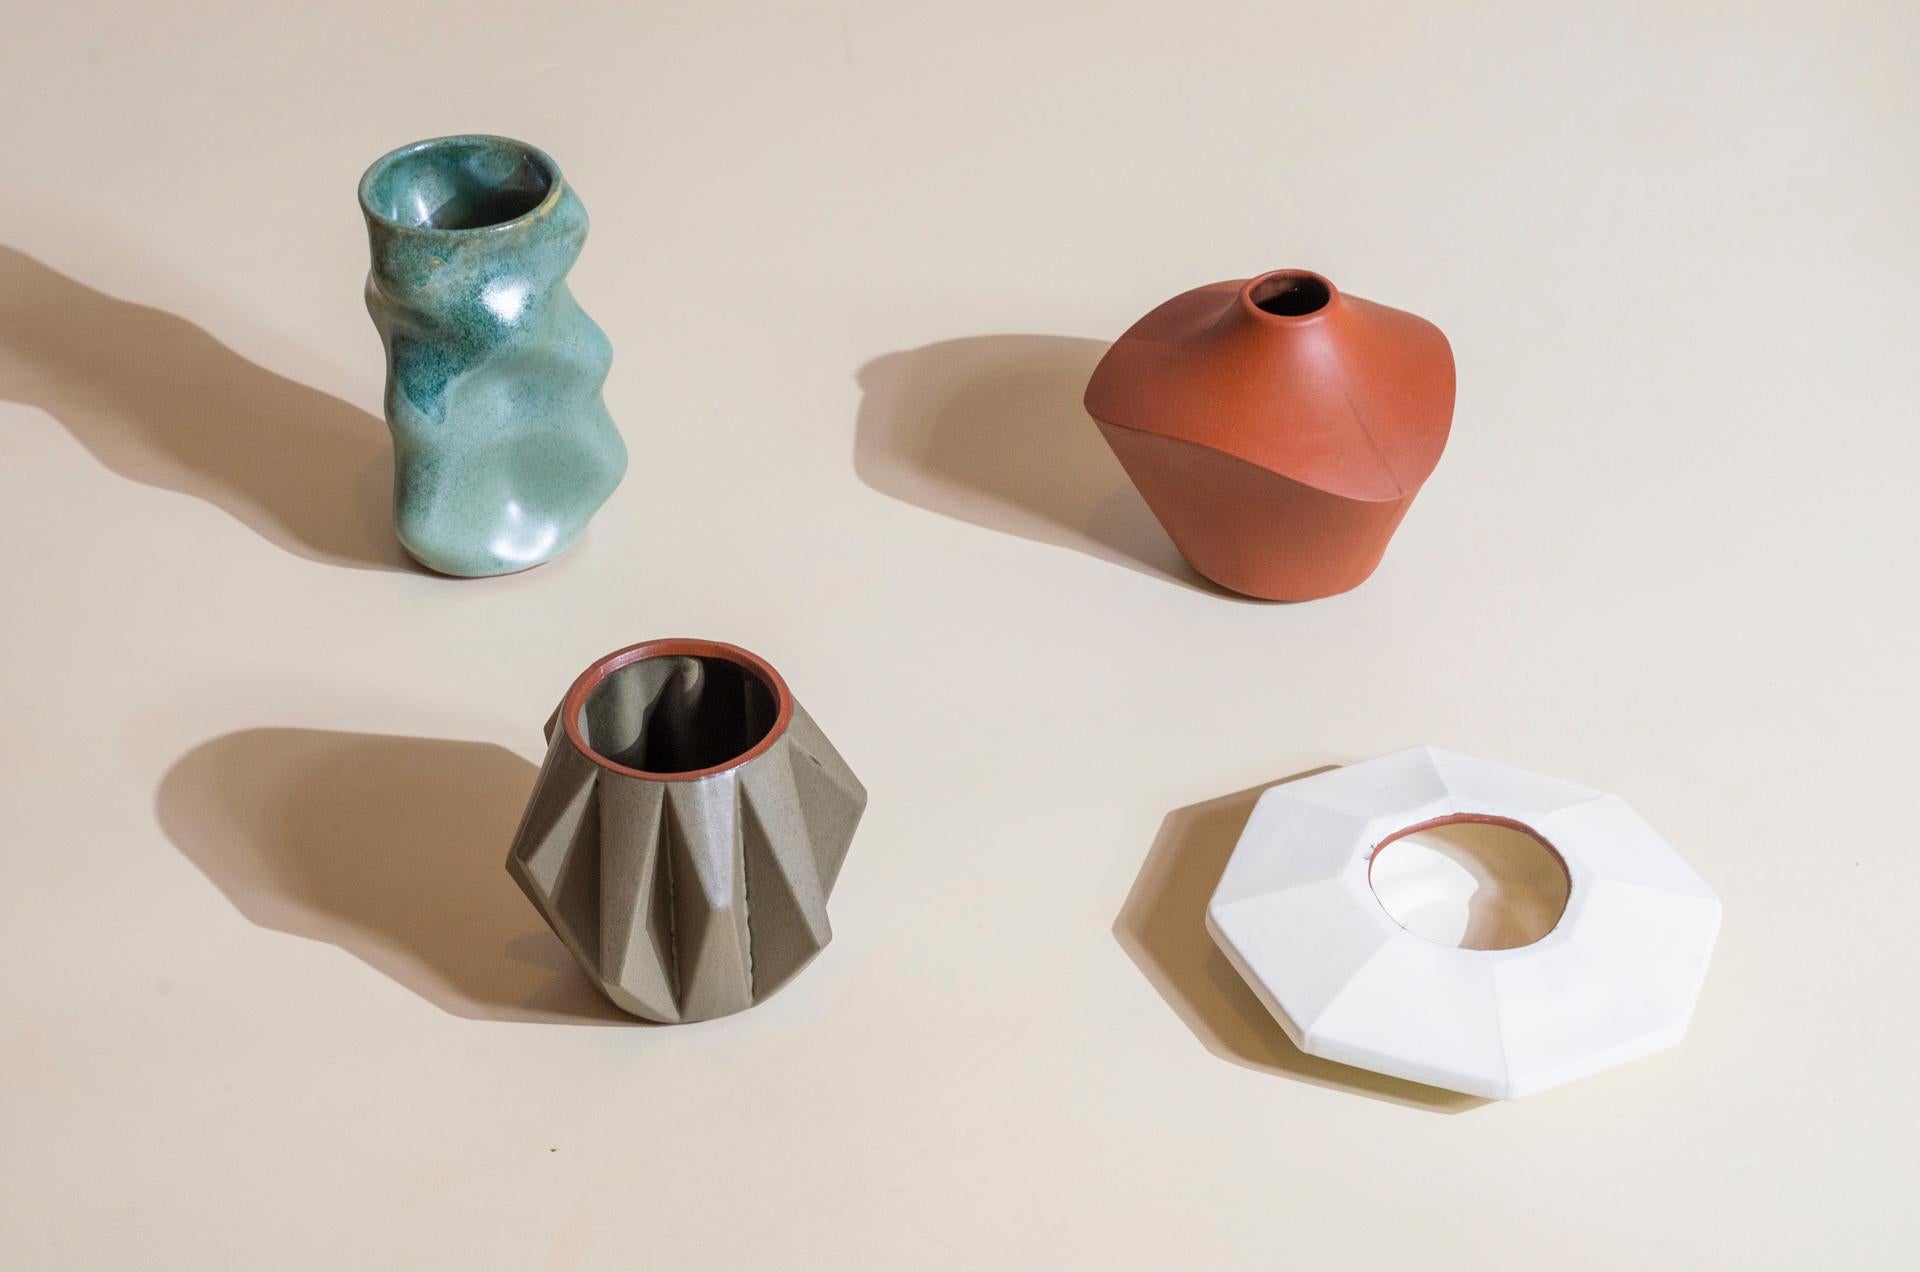 Nomad is a modular system of vases that can be used in infinite ways. The modules were created to work either alone or fitted together vertically (totem) or horizontally to generate the most varied compositions, adapting to different scales, spaces,